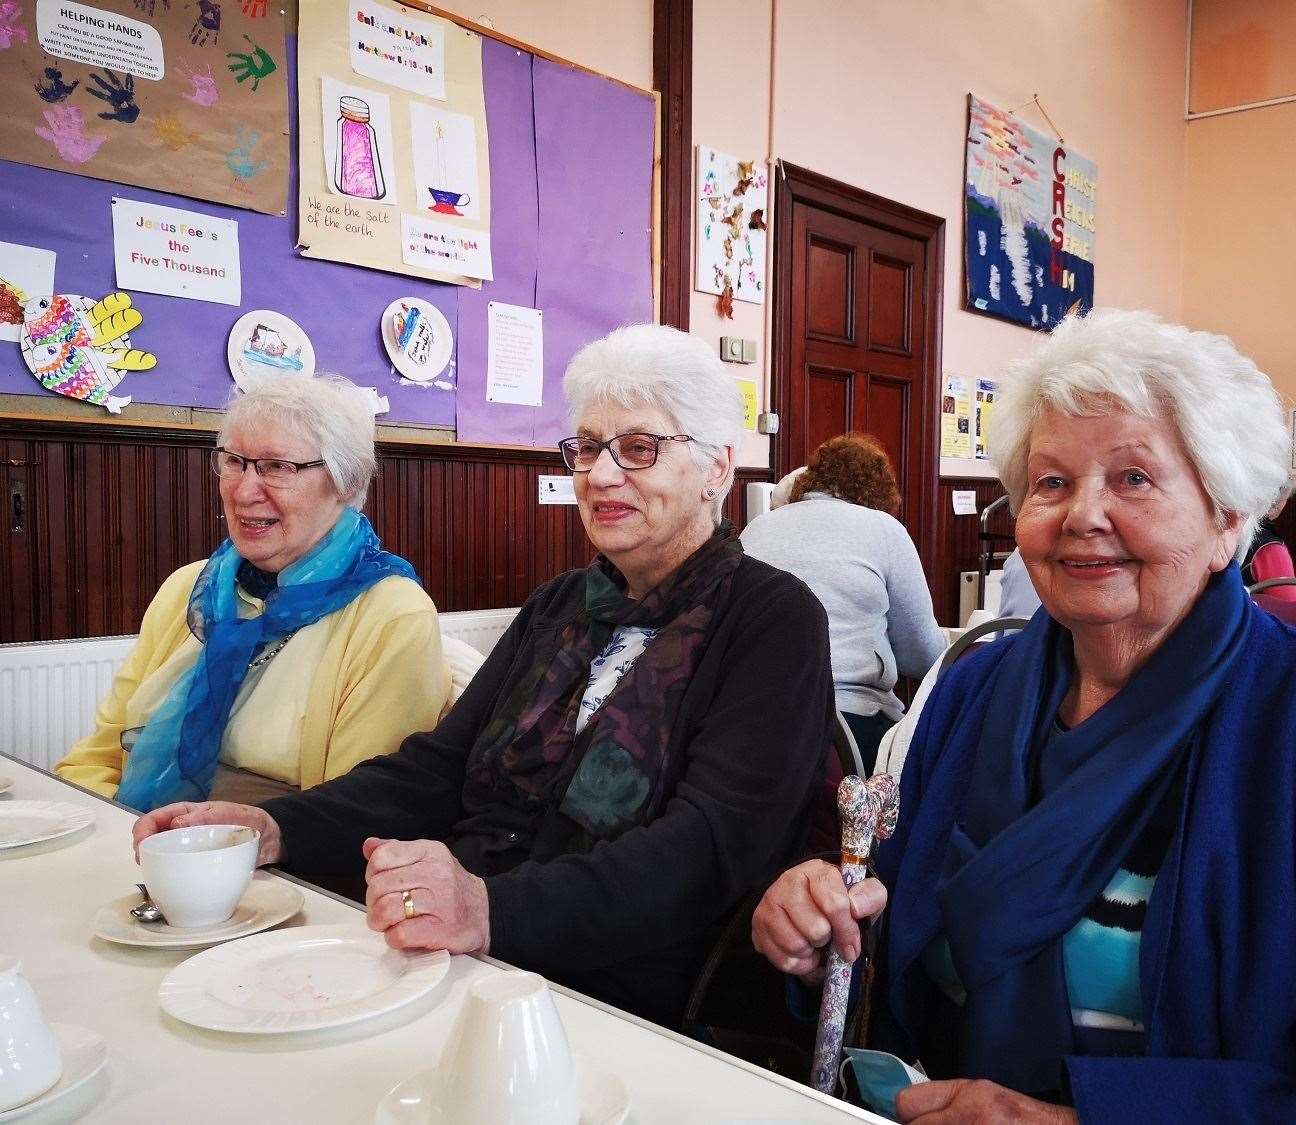 Coffee morning attendees swapped stories of Les' good deeds.